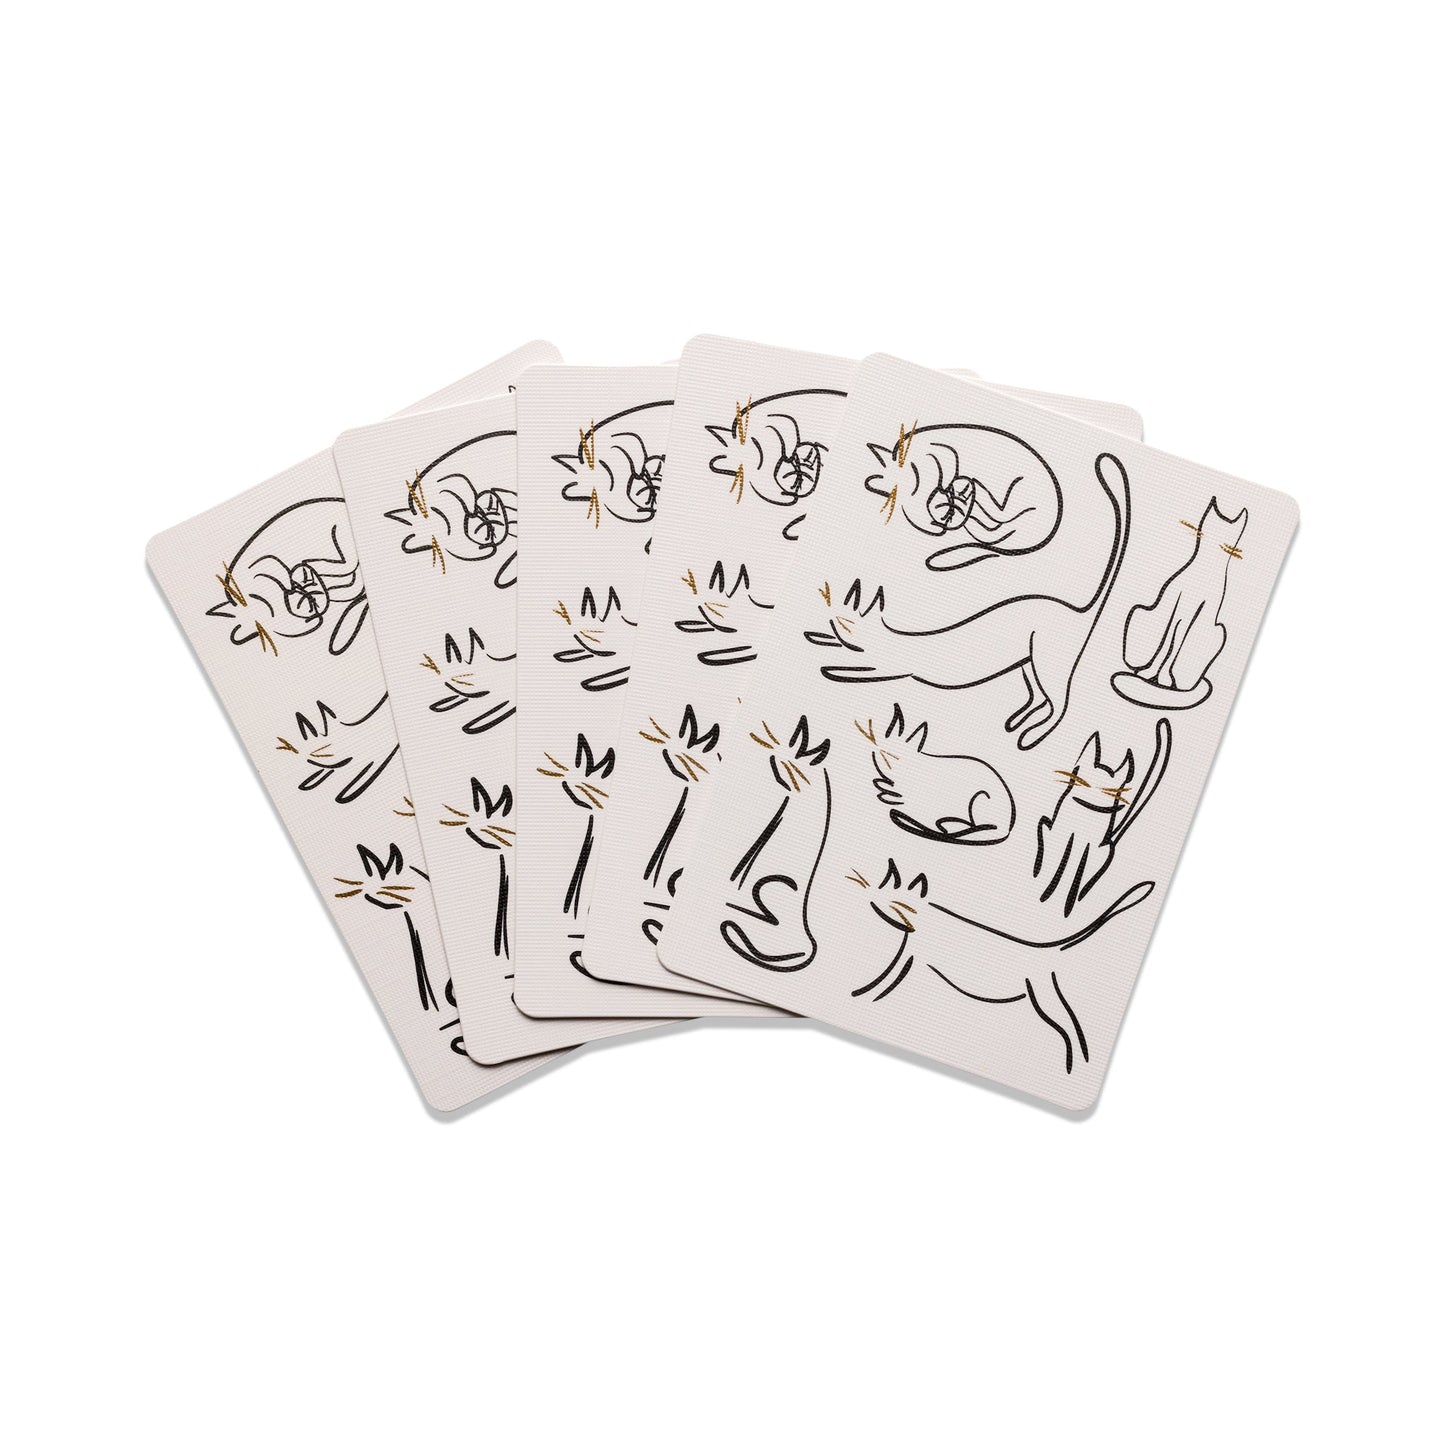 Playing Cards - Cats - face down cards with cats printed on back